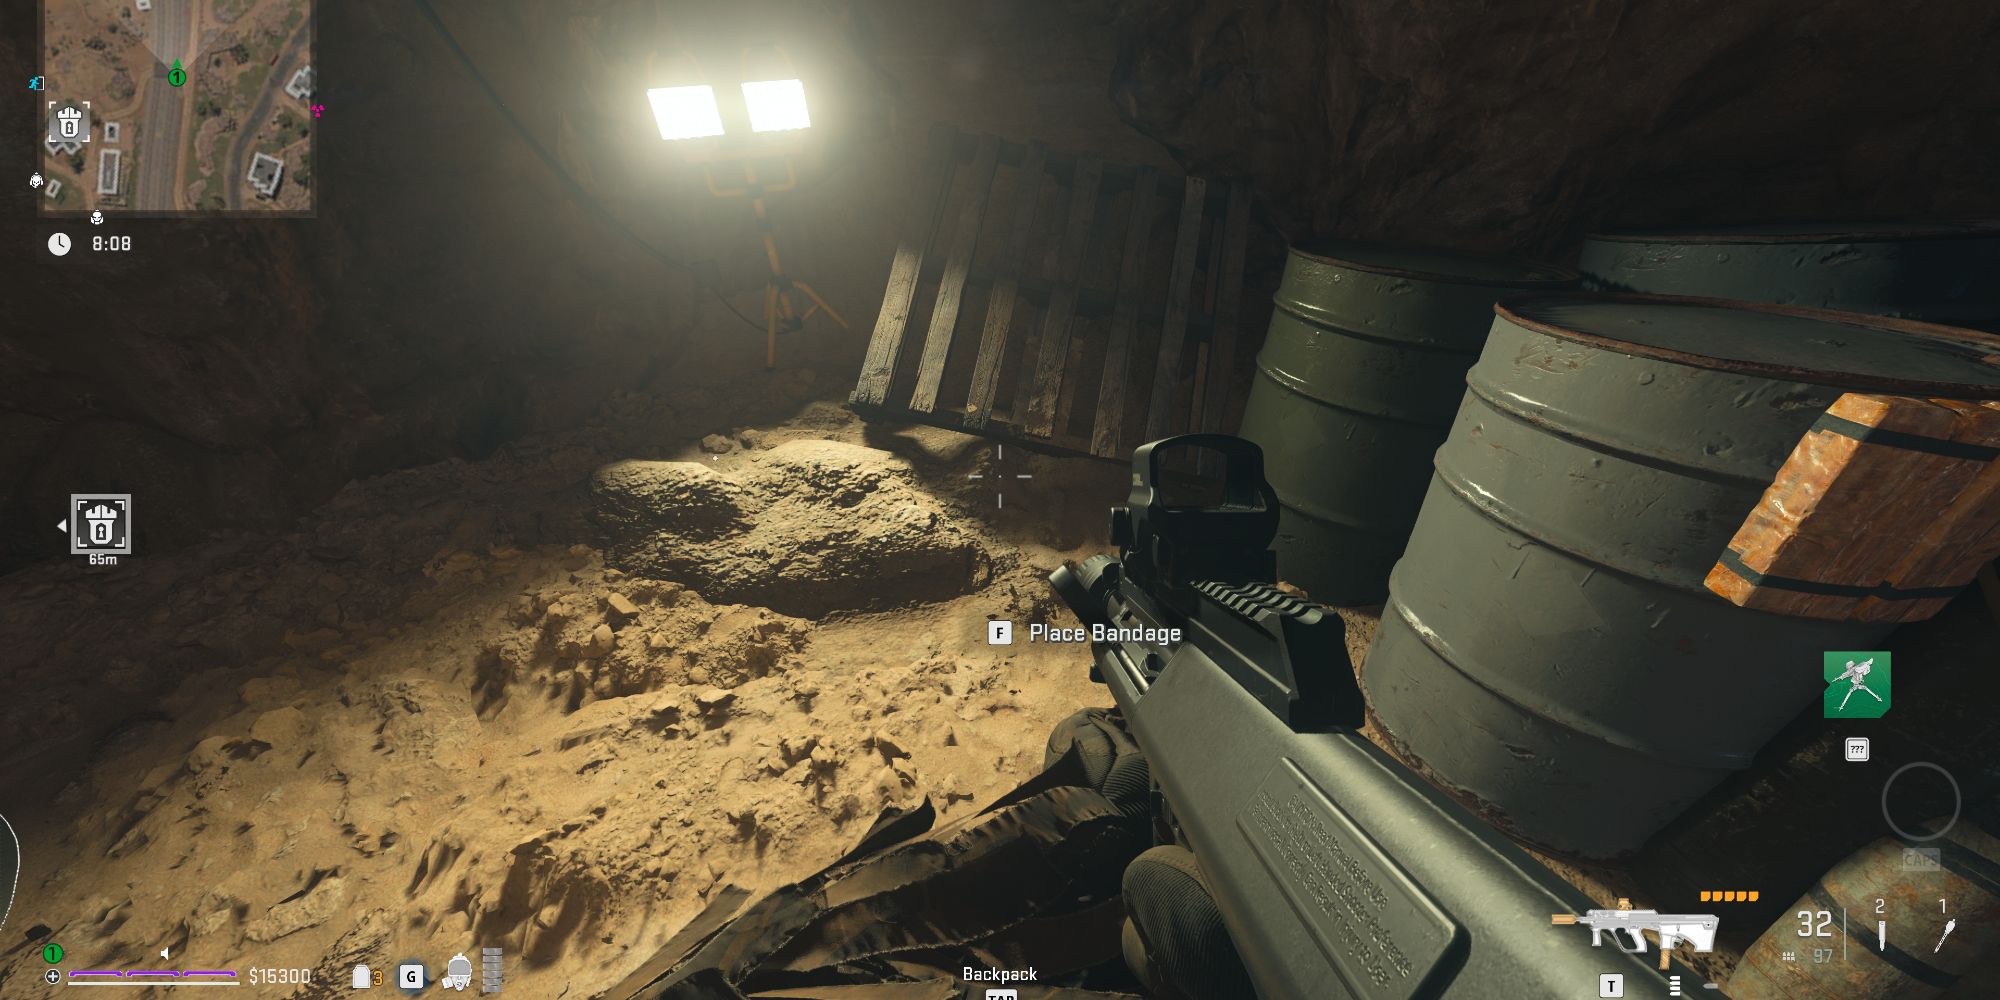 Where to place a bottle of water, bandage, and emergency ration pack for Hideout Preparation in Warzone 2 DMZ 